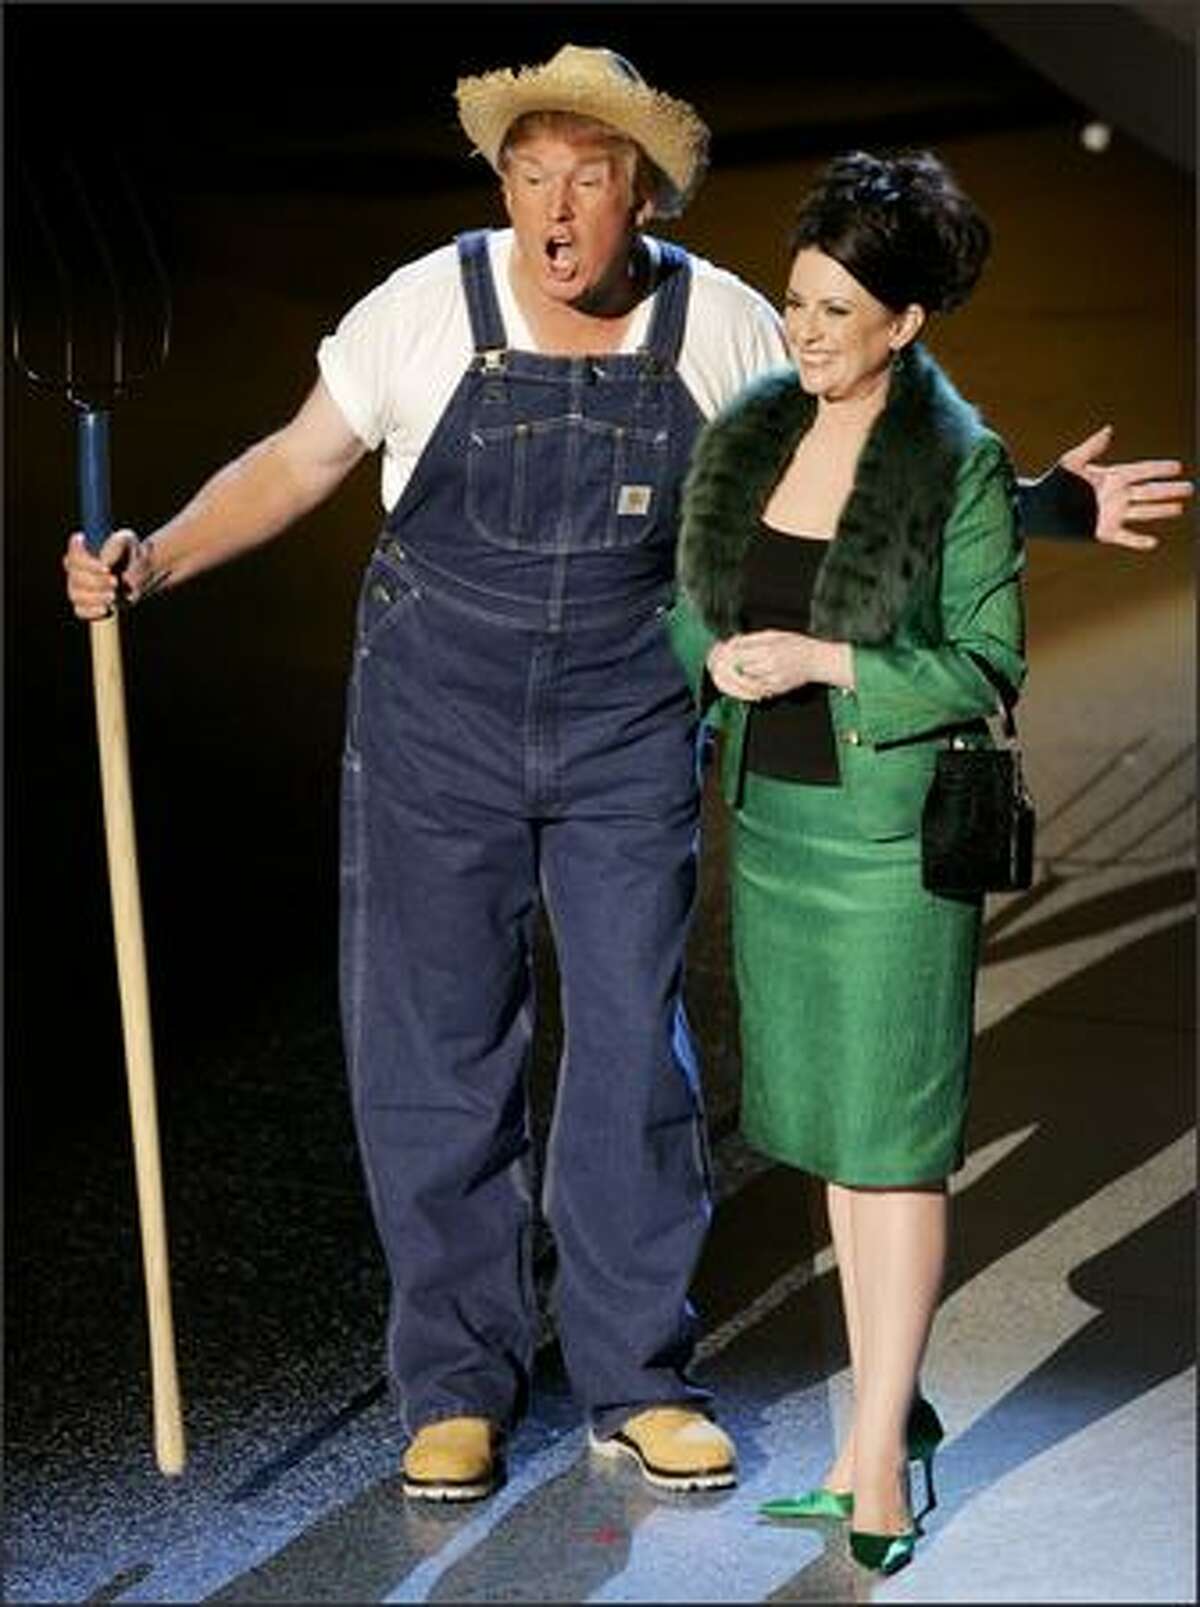 Donald Trump and Megan Mullally sing the theme from "Green Acres" in the opening round of a viewer's-choice "Emmy Idol" competition that ran throughout the 57th Annual Primetime Emmy Awards. No surprise: they won. (AP Photo/Mark J. Terrill)